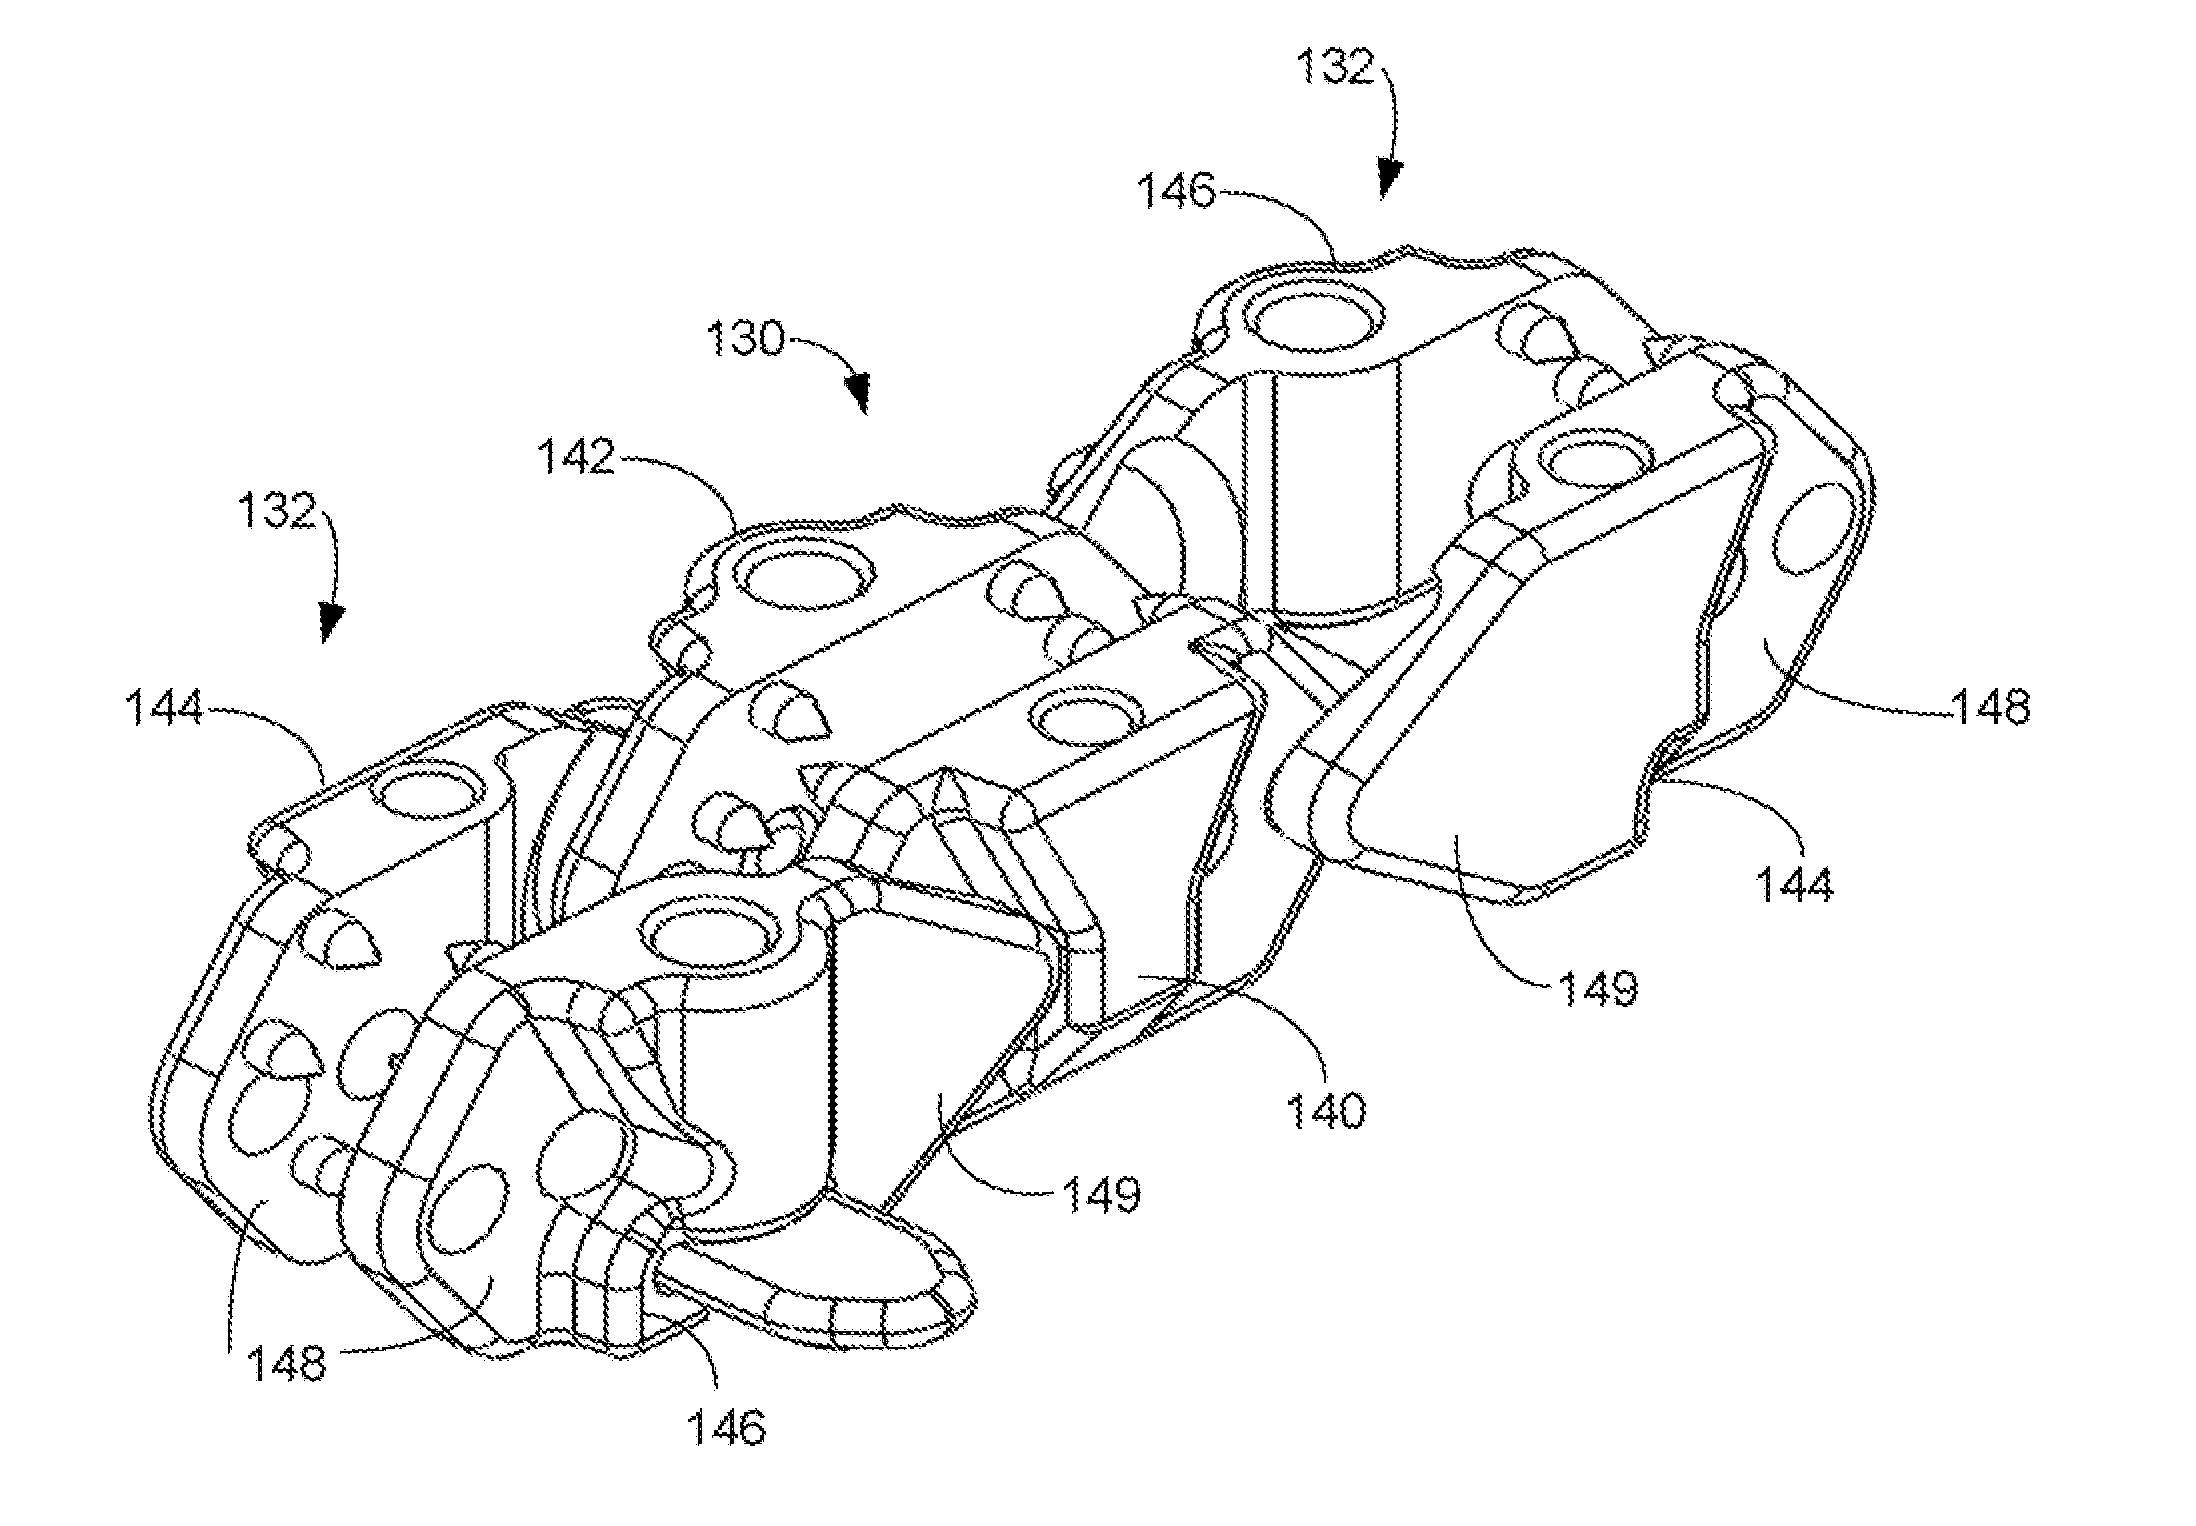 Interspinous Process Spacing Device